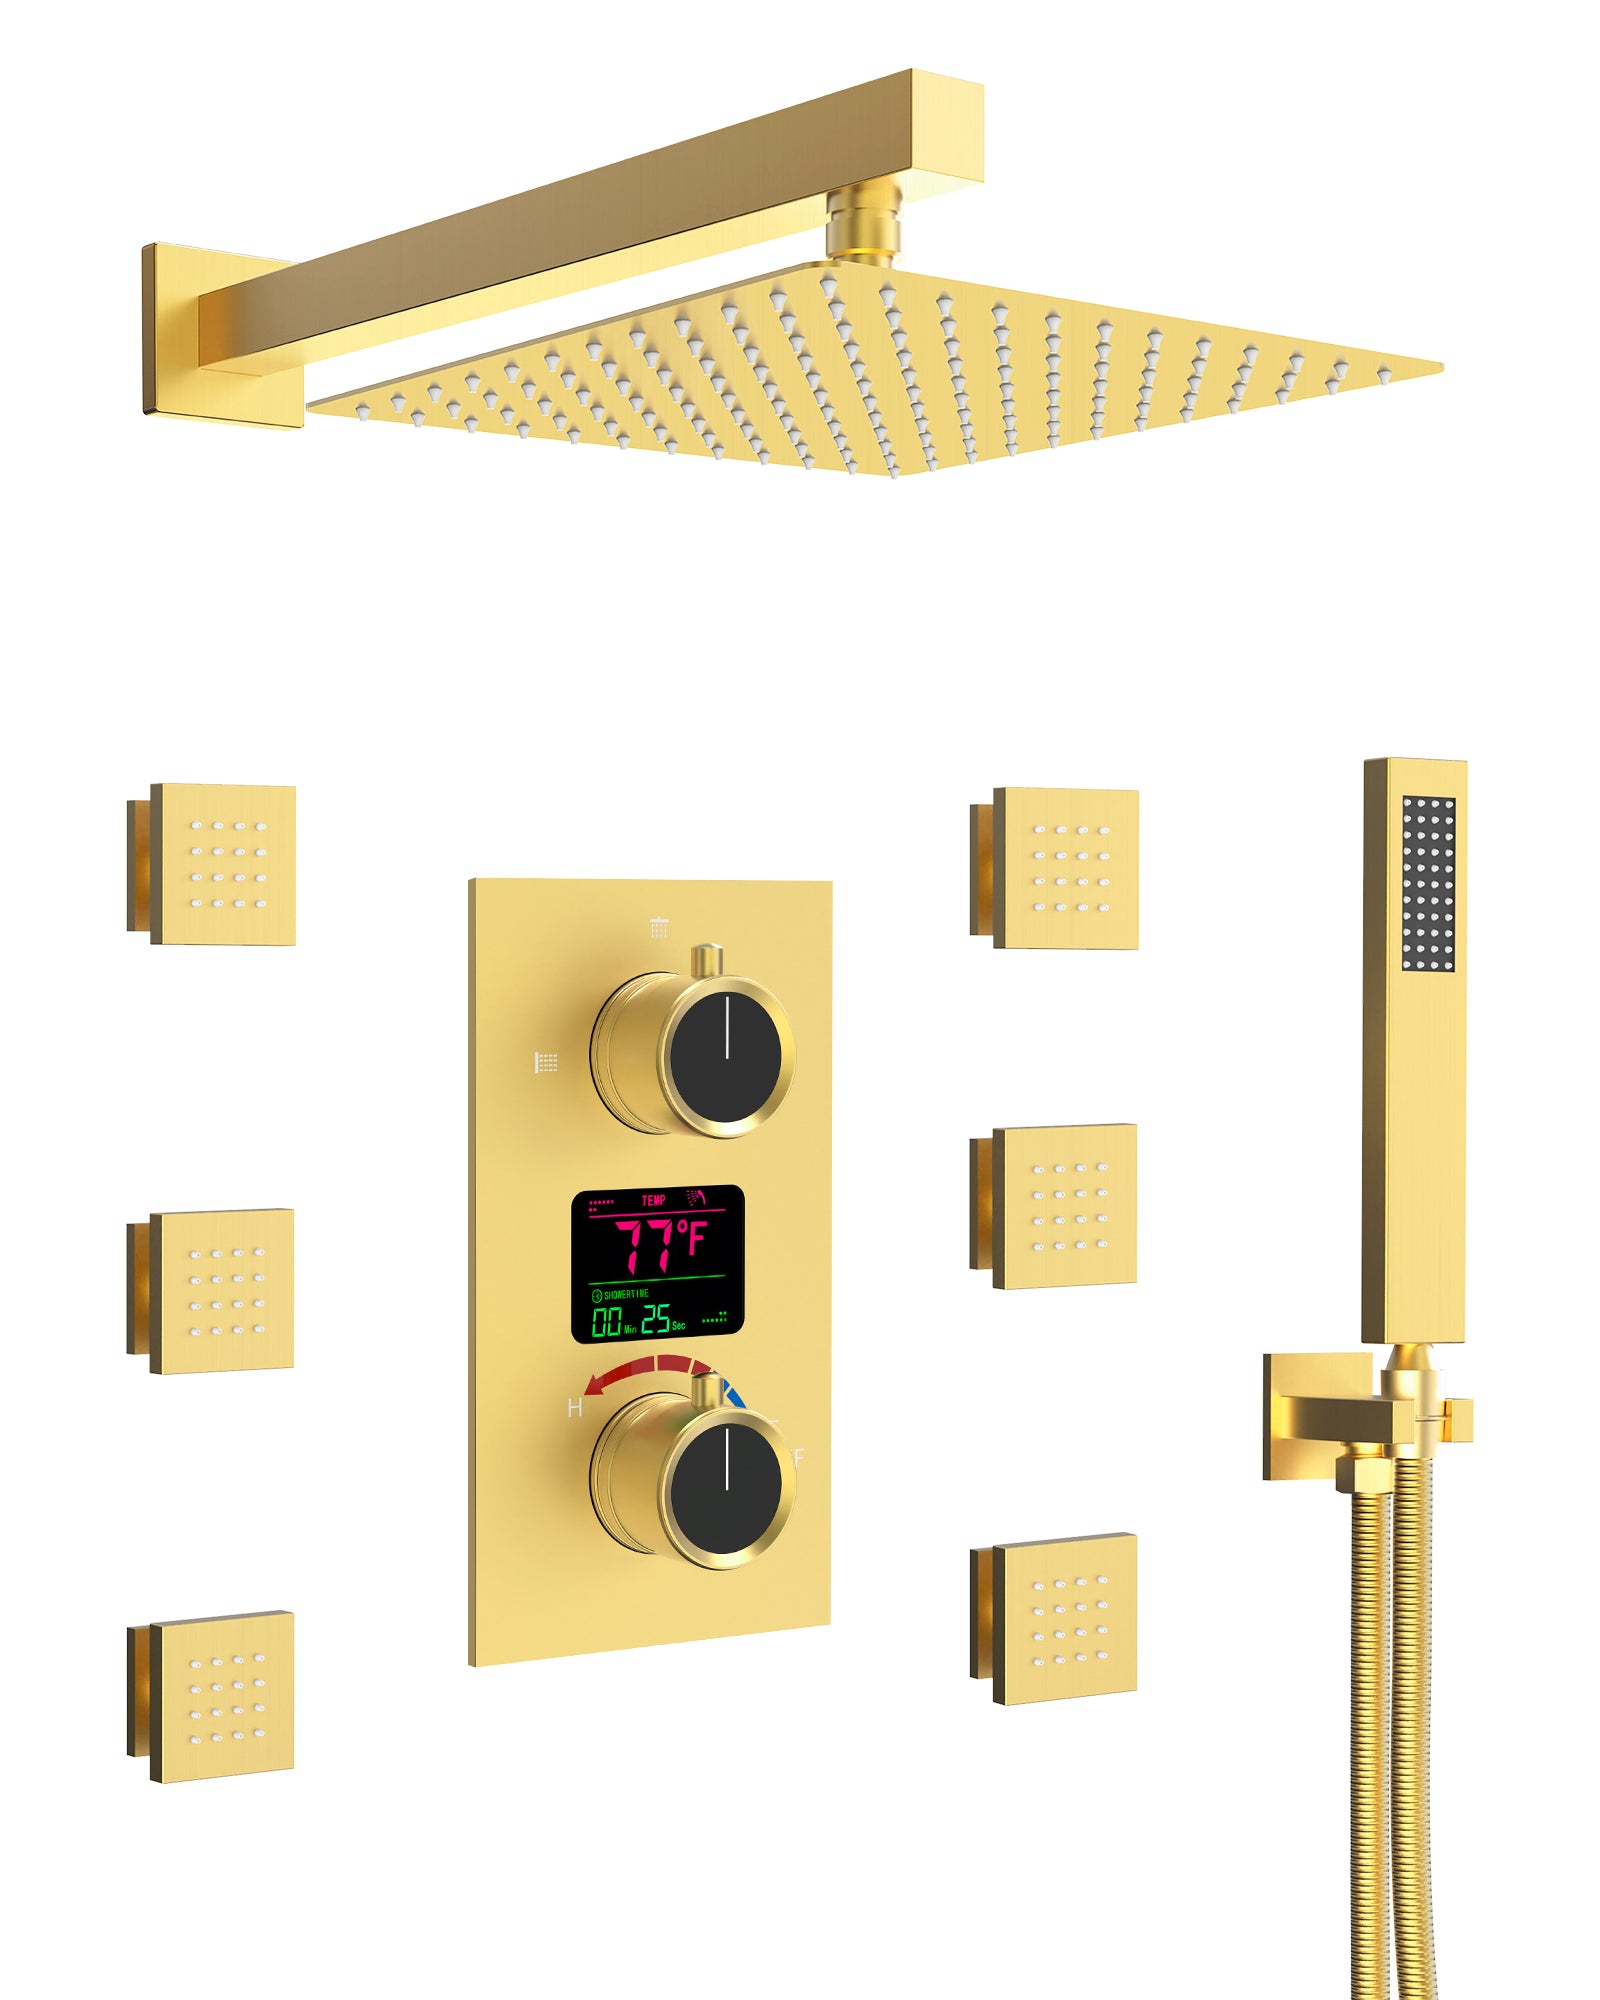 SFS-1014-GD12 EVERSTEIN Wall Mounted Constant Temperature Shower Faucet with LED Display Rain Shower System, with 6 Massage Nozzles and Hand-held Spray,Brushed Gold